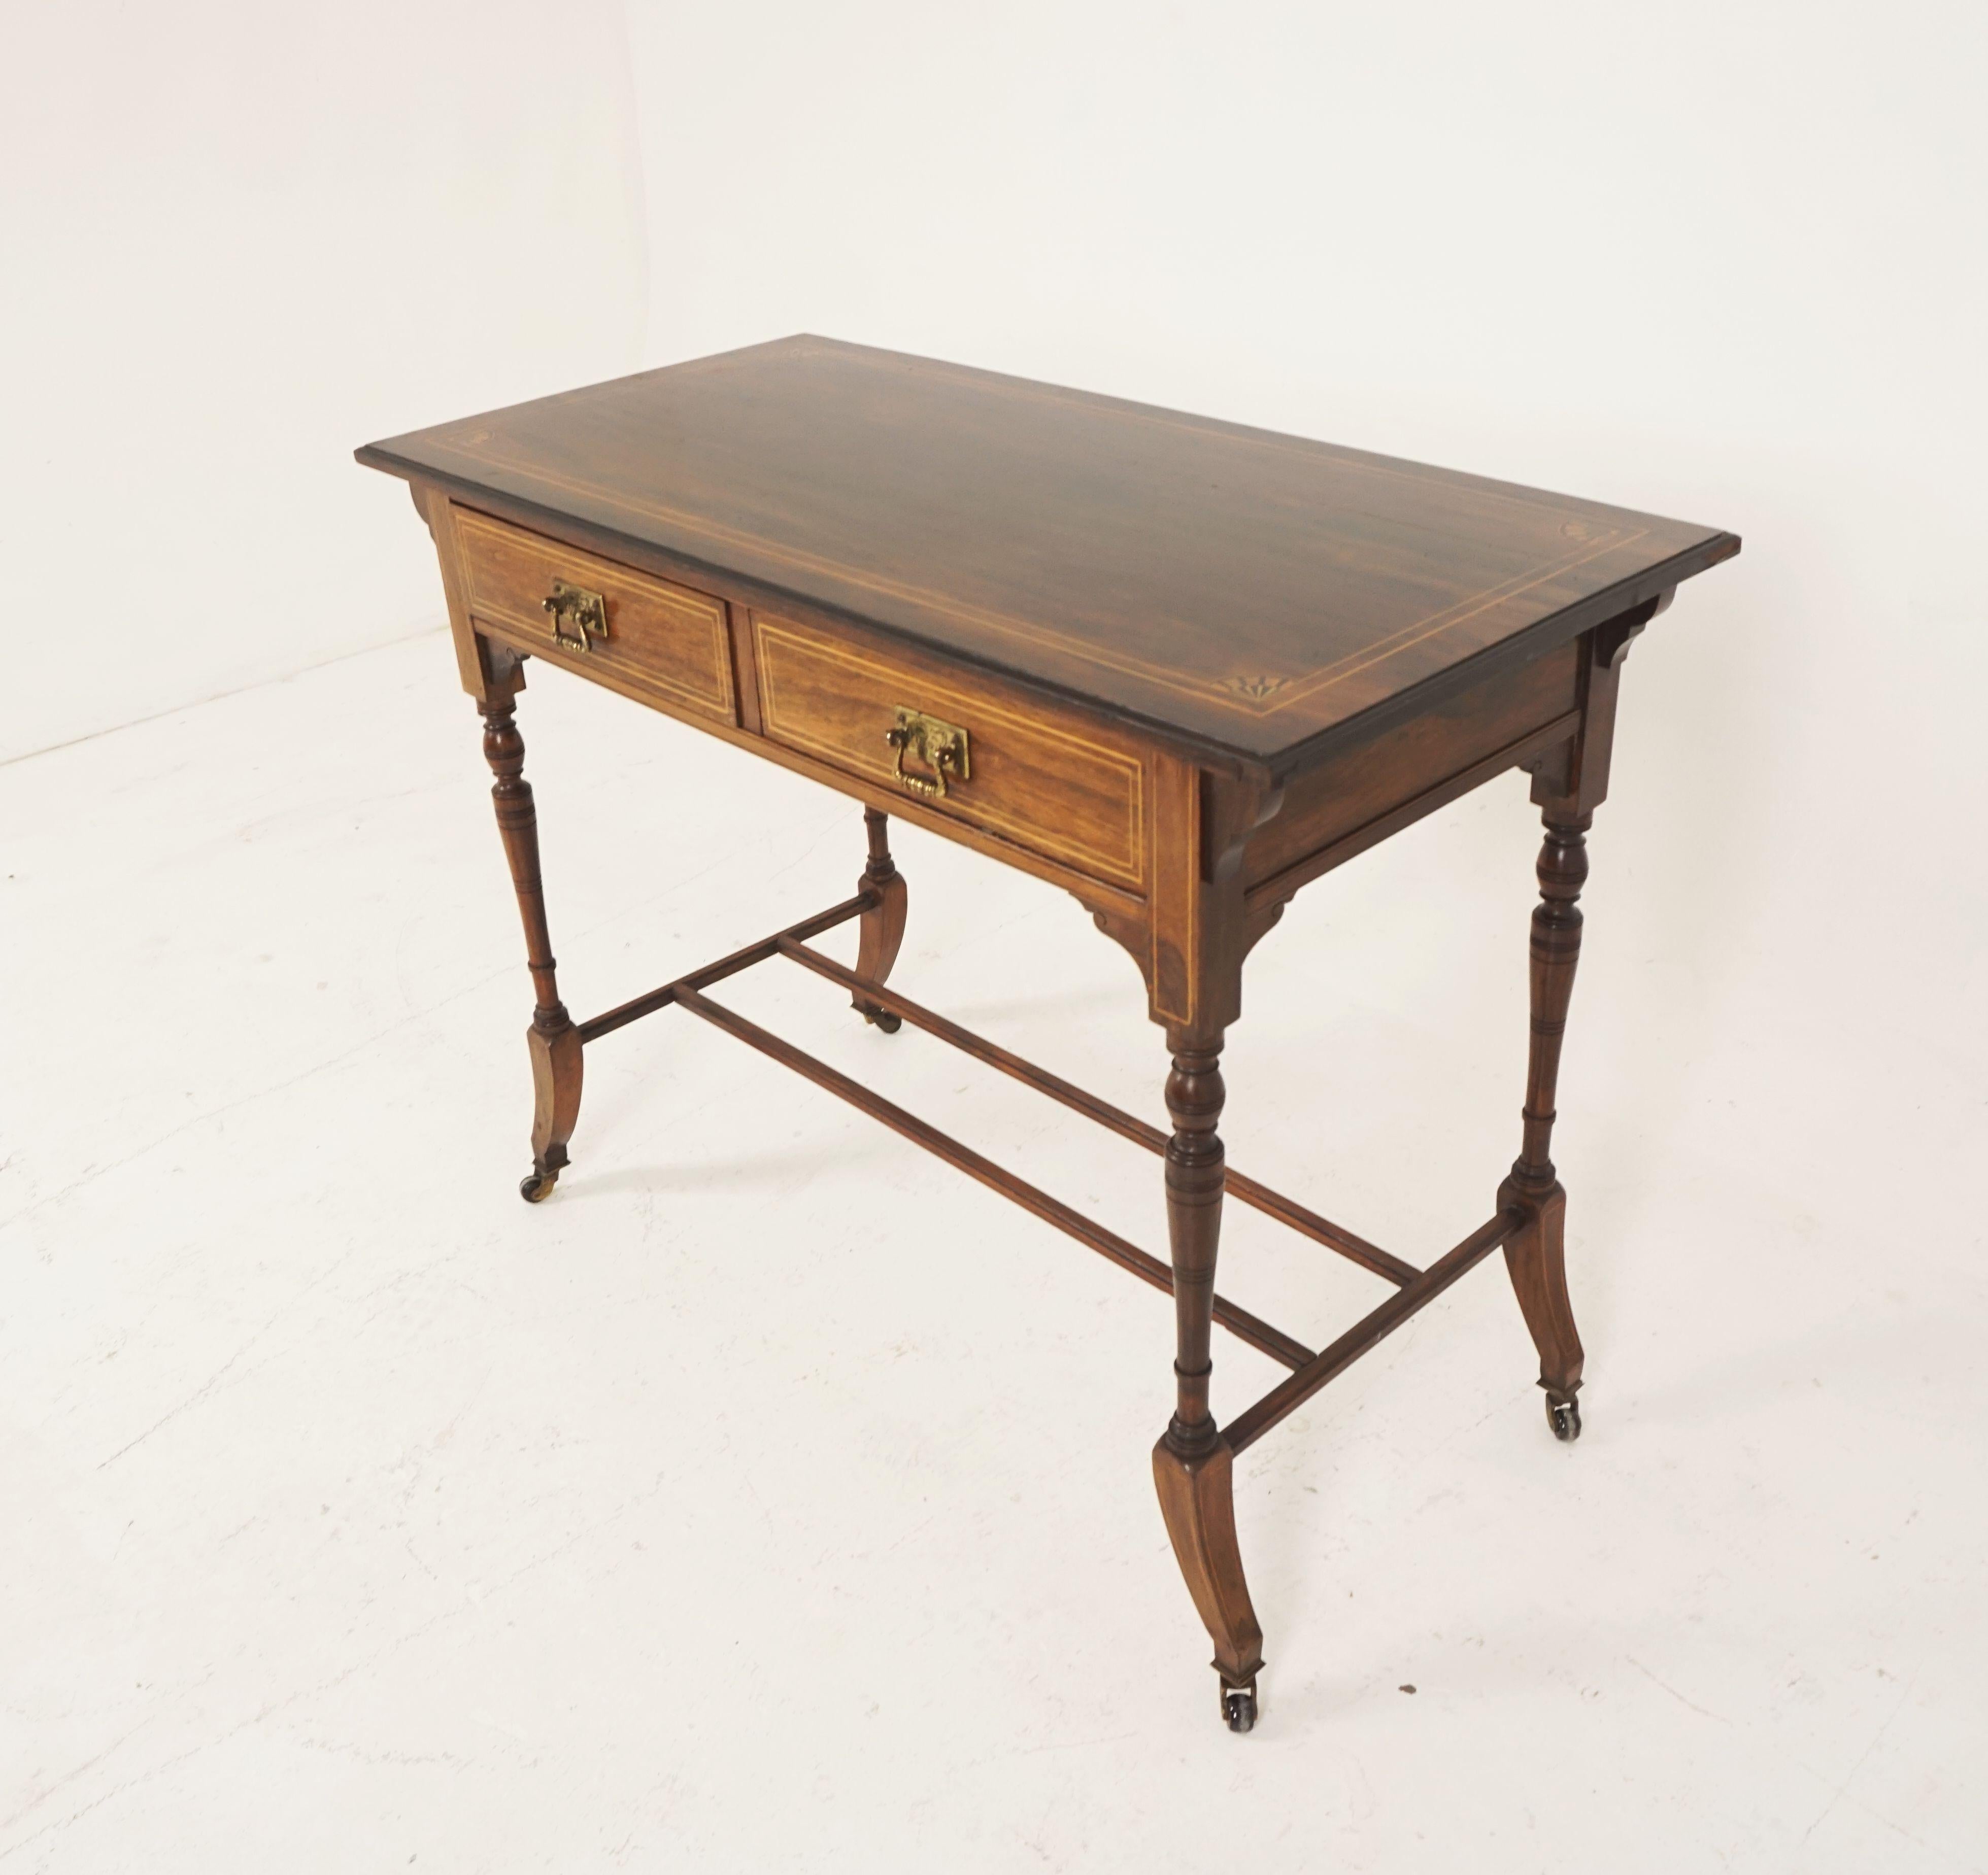 Hand-Crafted Antique Edwardian Inlaid Writing Table, Rosewood Hall Table, Scotland 1910, B2368